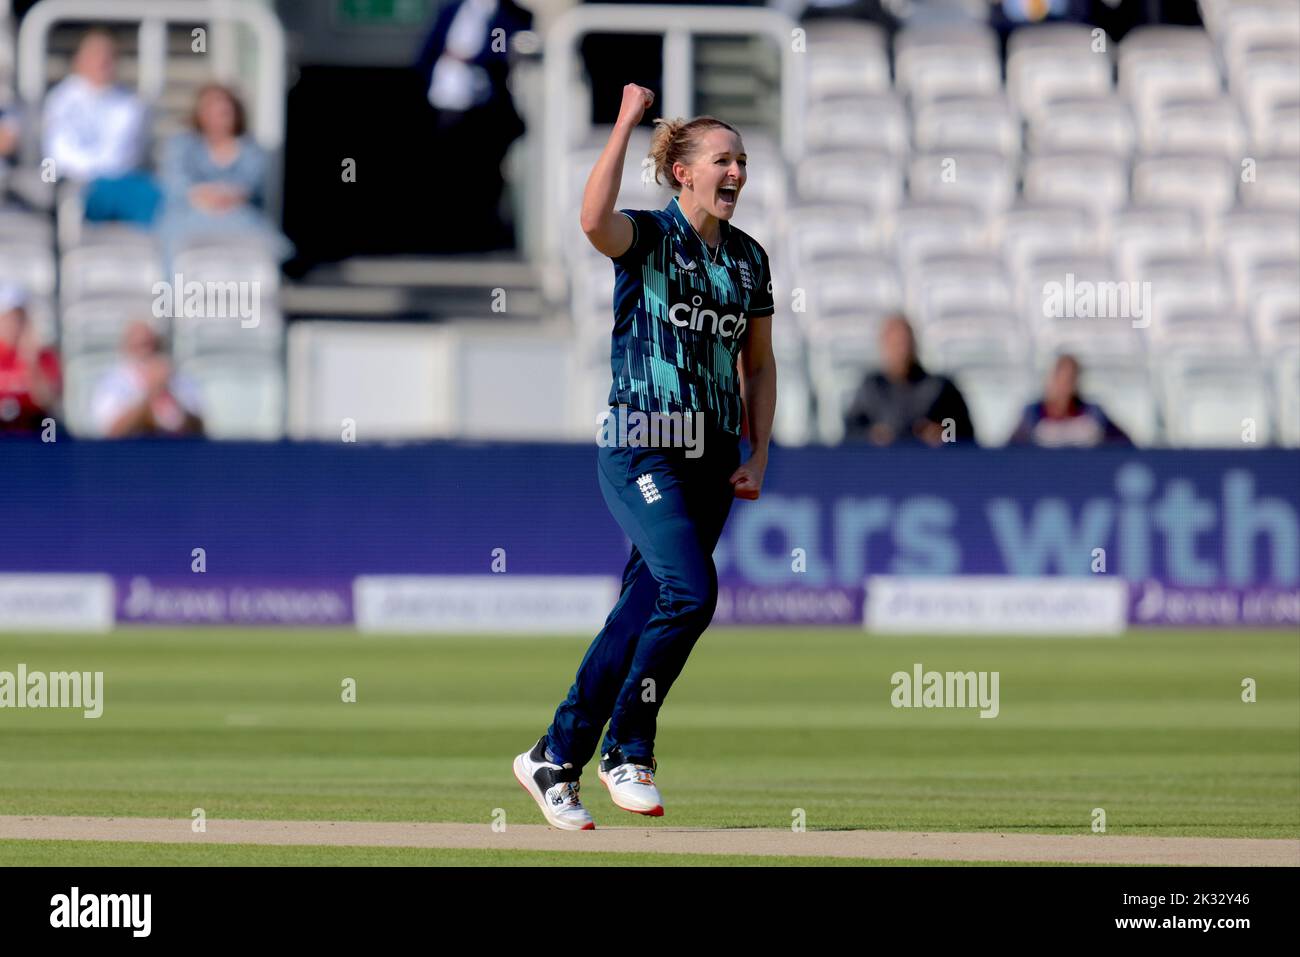 London, UK. 24 September 2022.  England’s Kate Cross gets Shafali Verma as England women take on India in the 3rd Royal London One Day International at Lords. David Rowe/Alamy Live News. Stock Photo